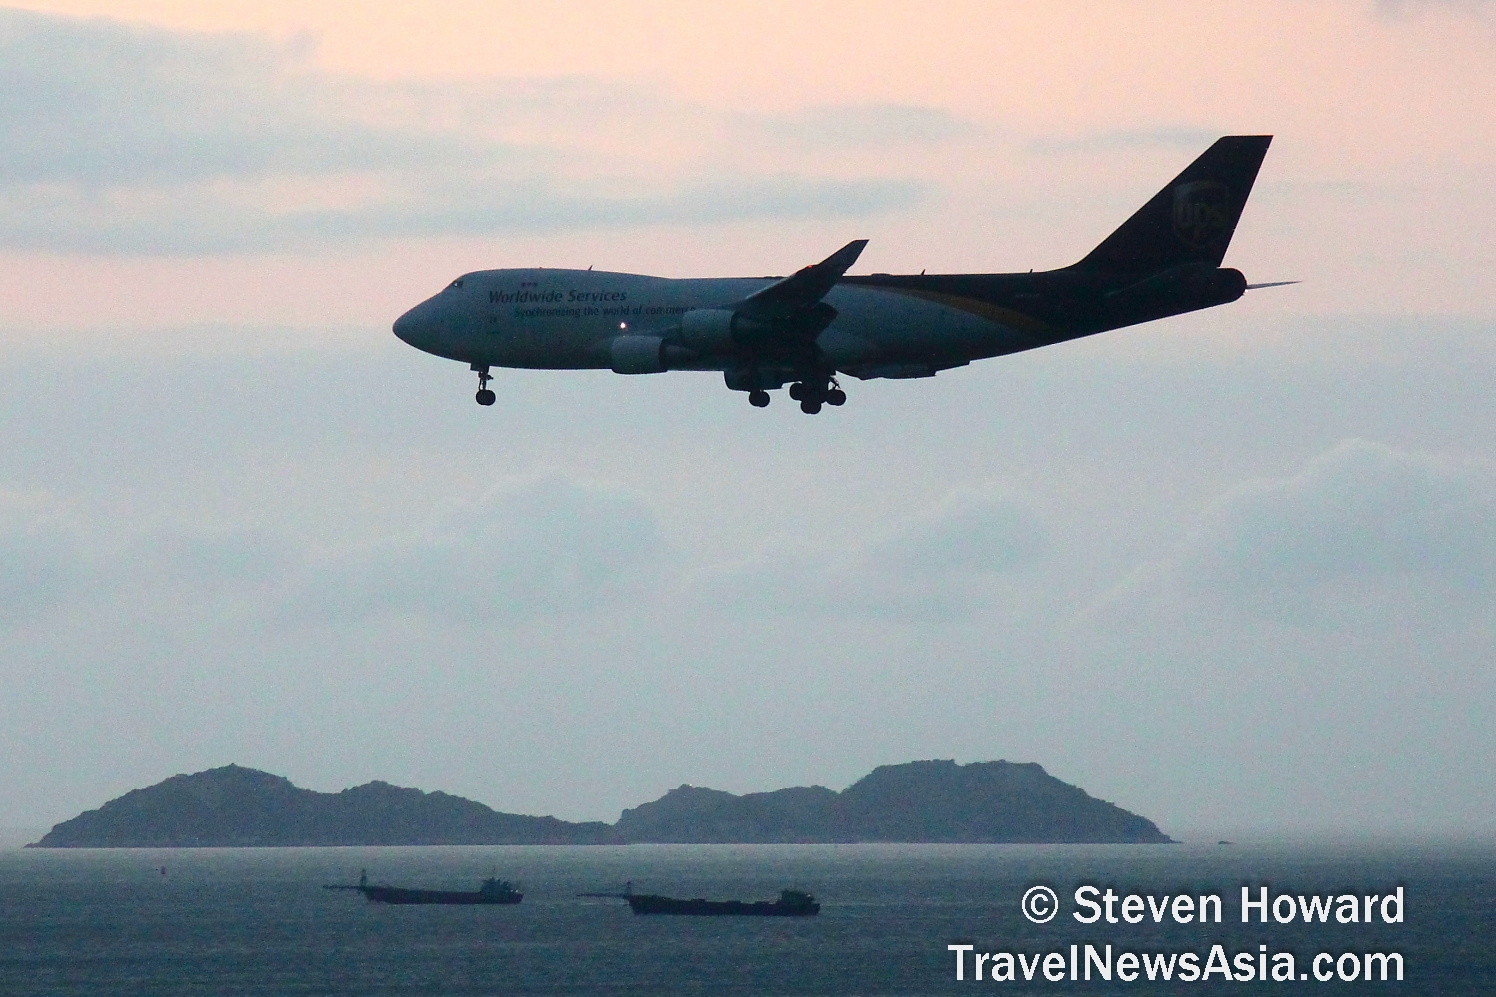 UPS Boeing 747F about to land at Hong Kong International Airport (HKIA). Picture by Steven Howard of TravelNewsAsia.com Click to enlarge.